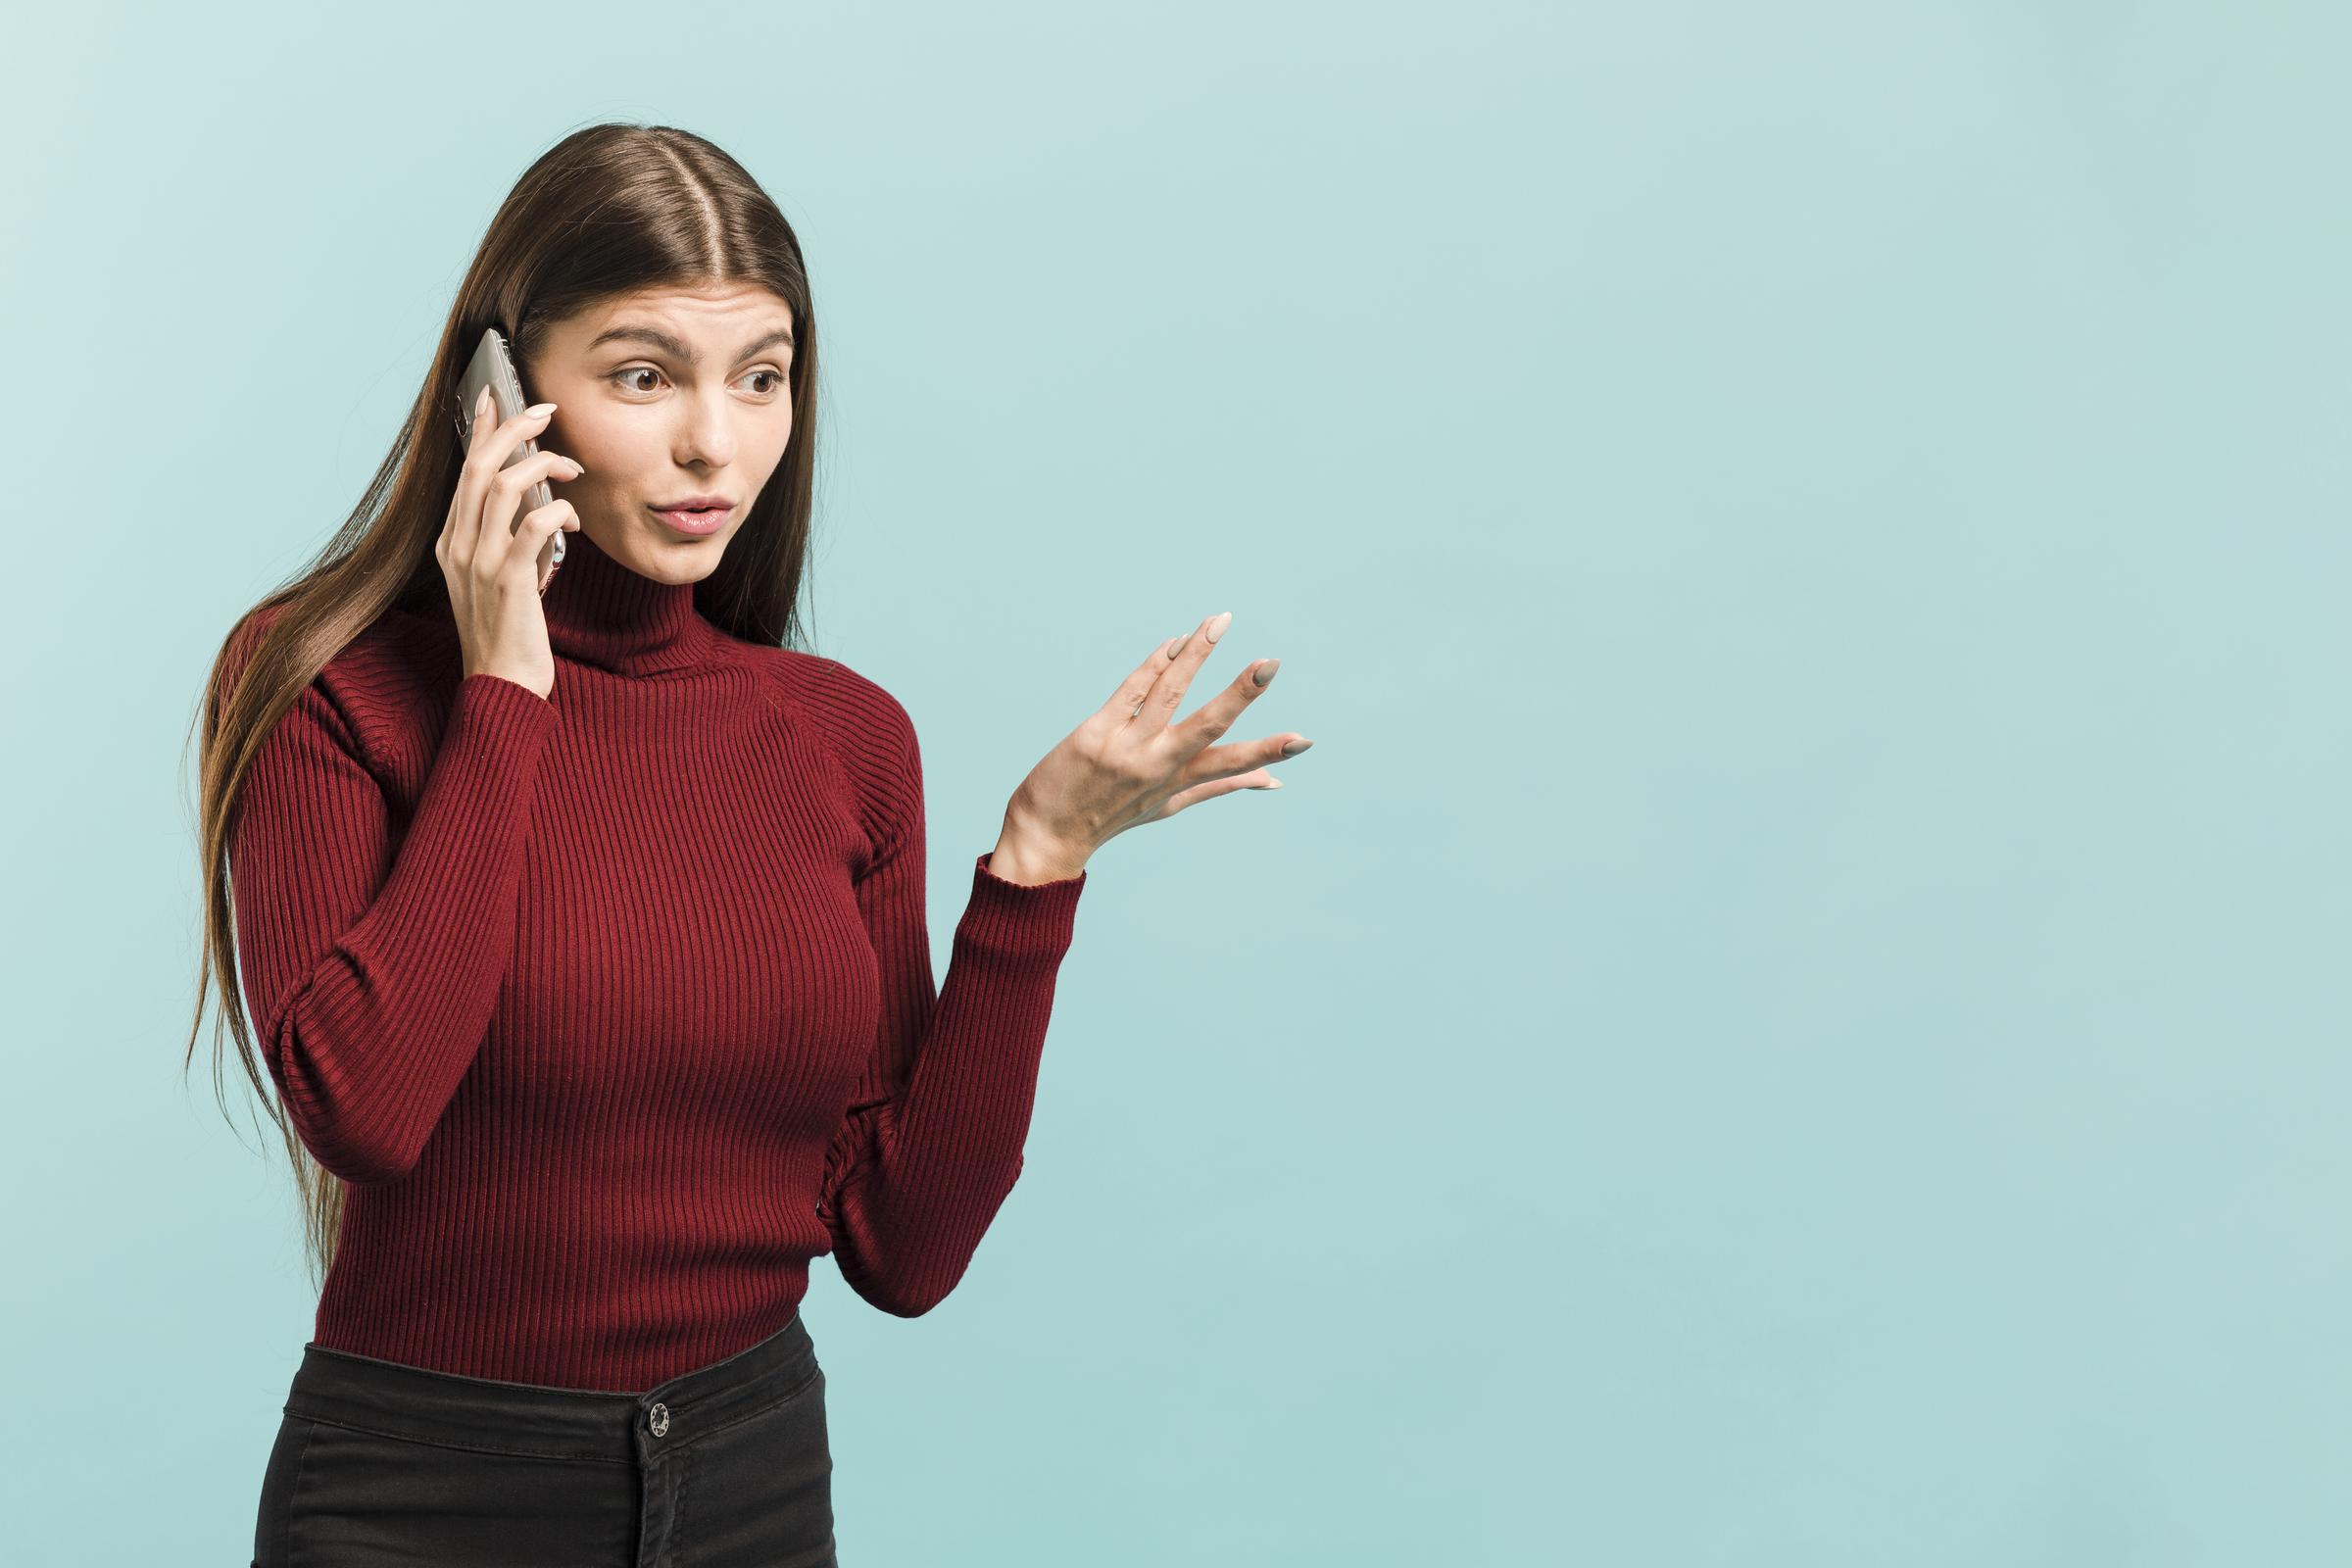 A woman on a call gesturing with her hand | Source: Freepik